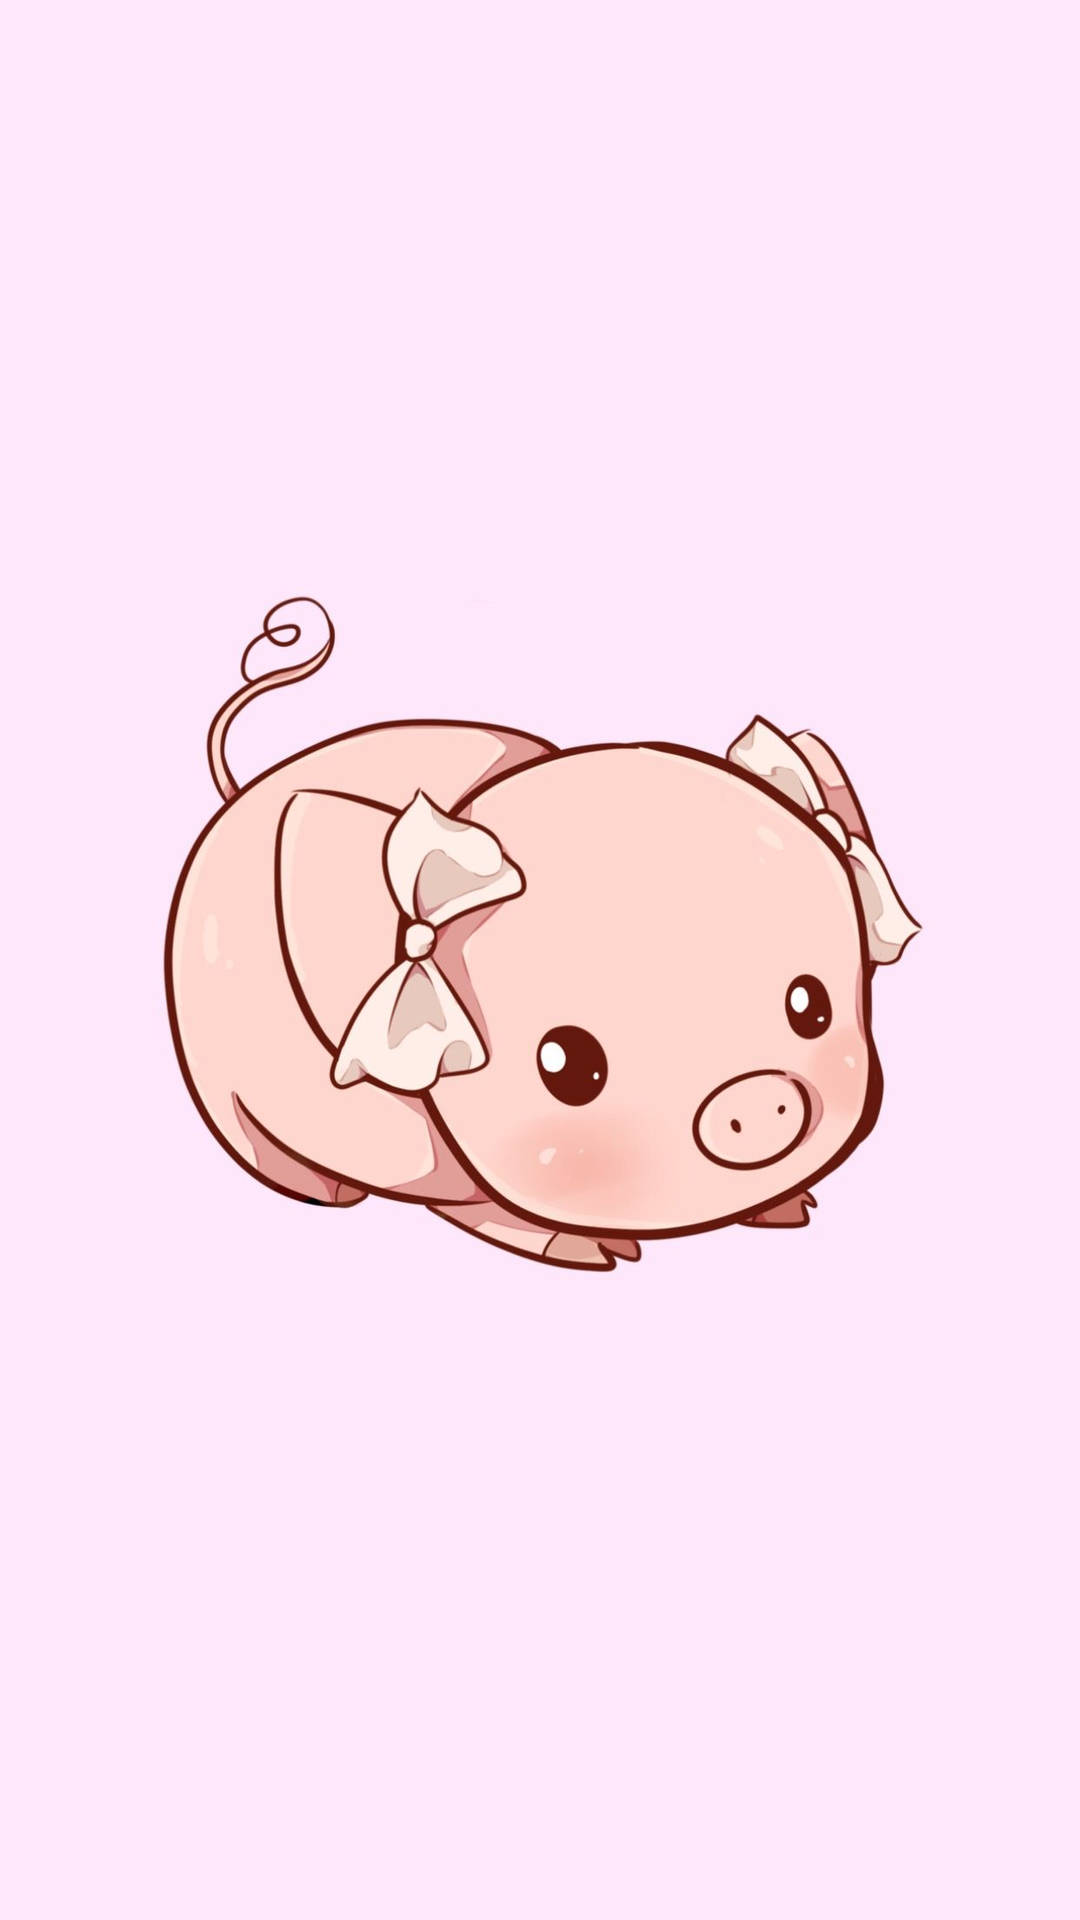 Cute Pig With Pink Bow